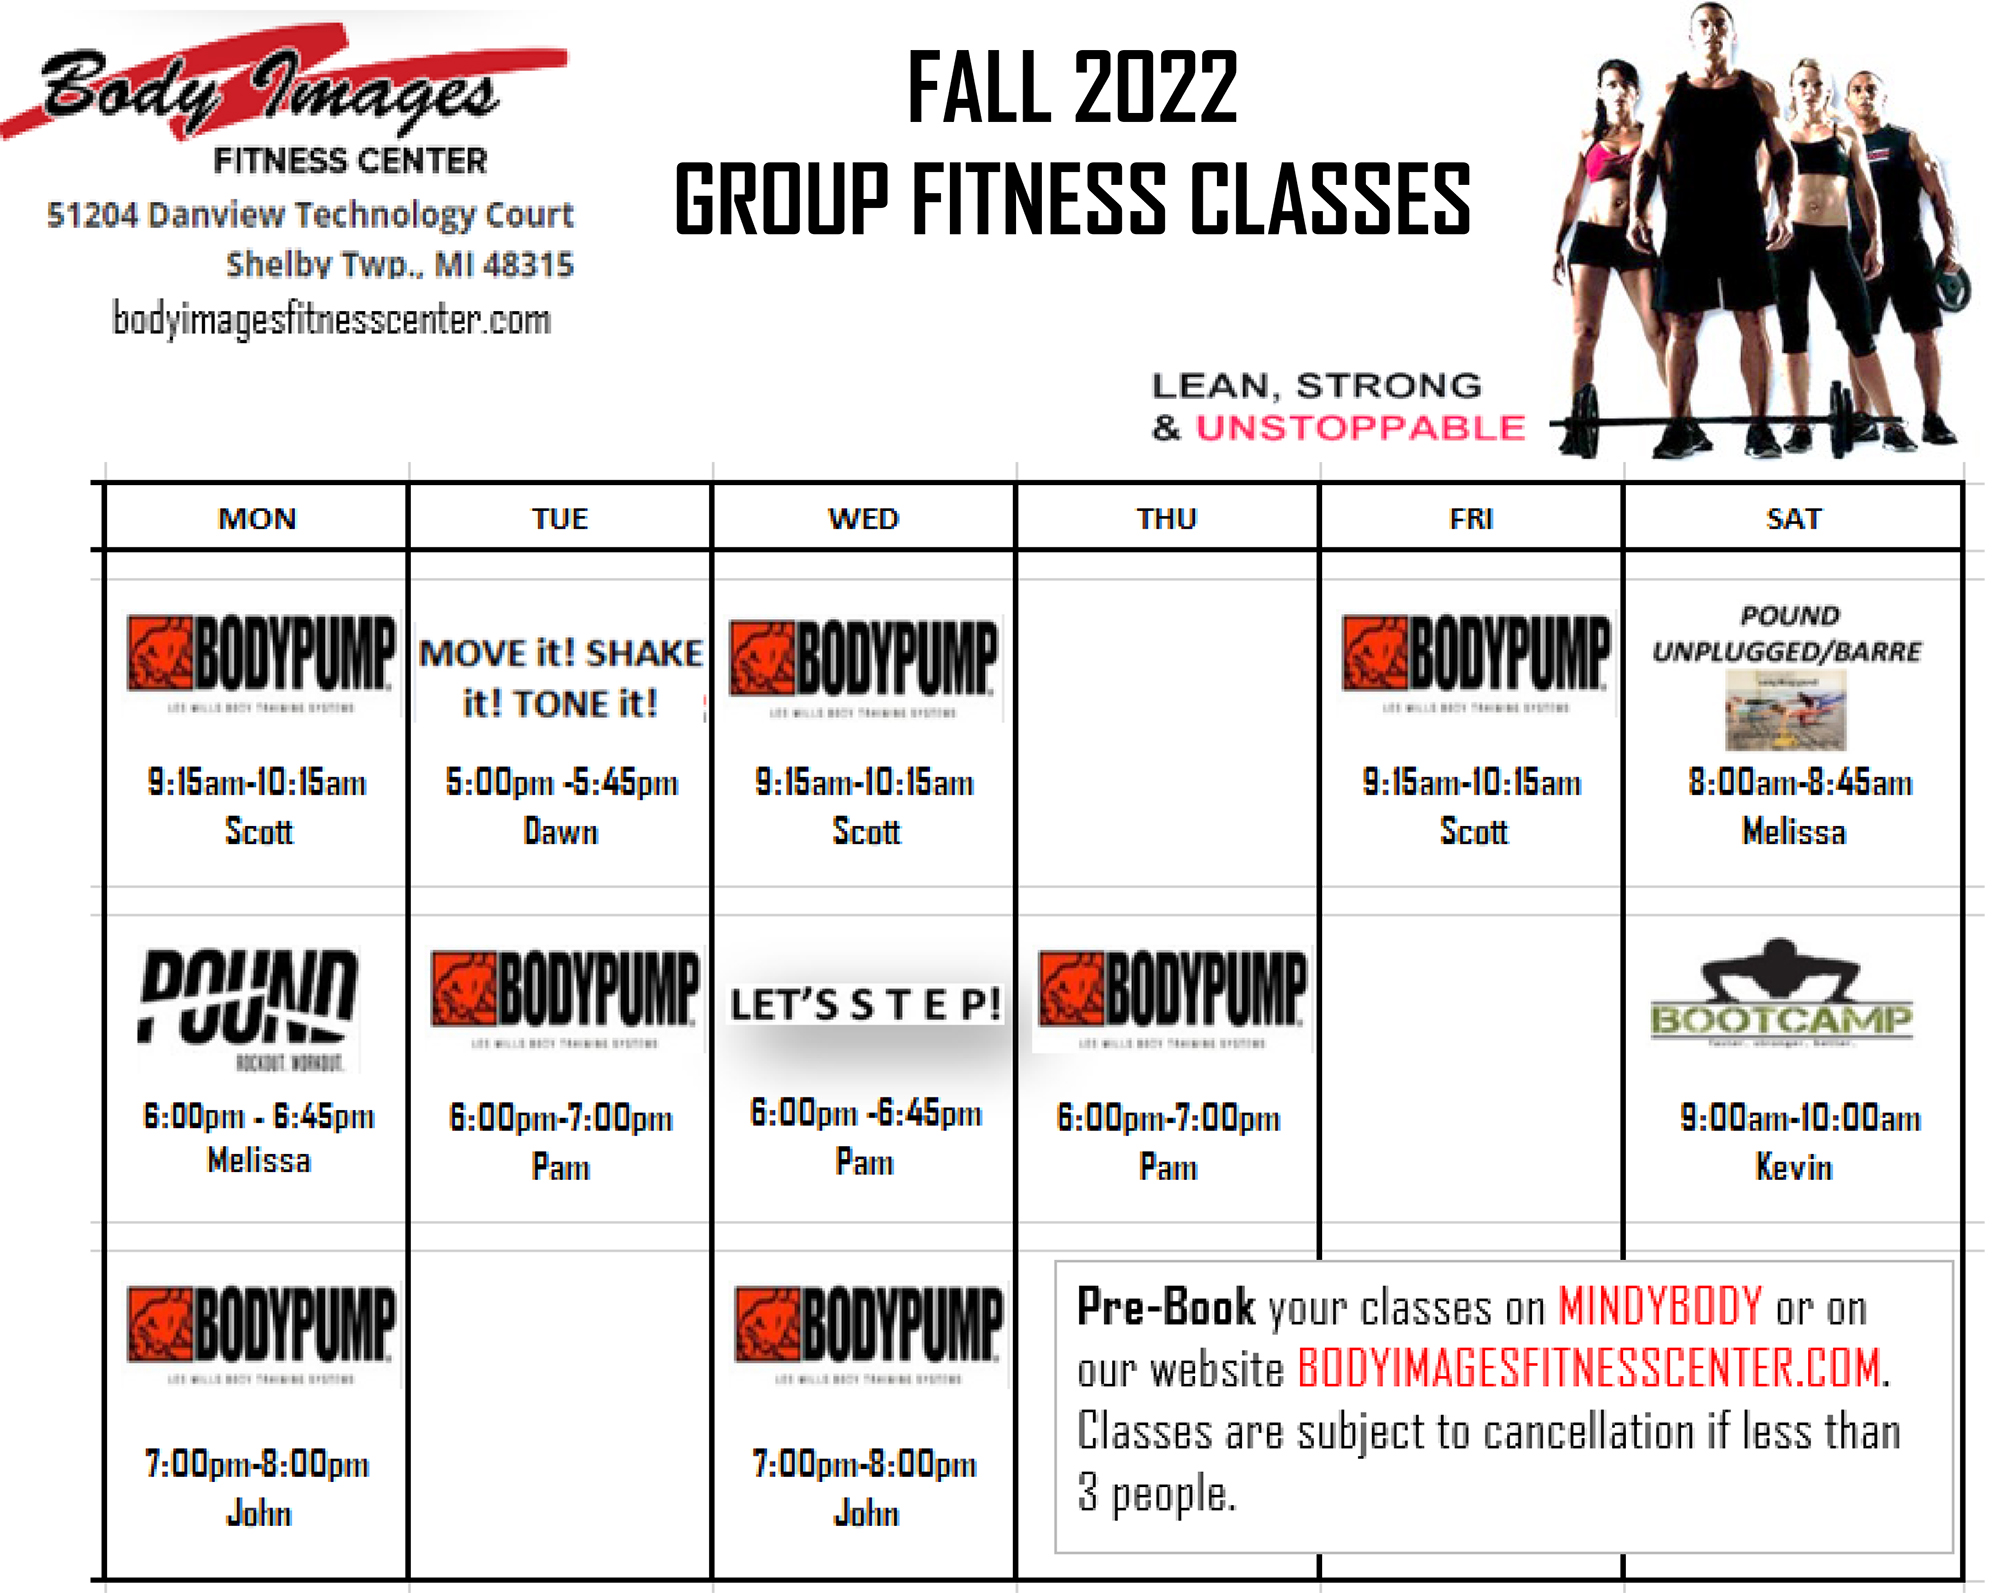 Fall 2022 Group Fitness Classes